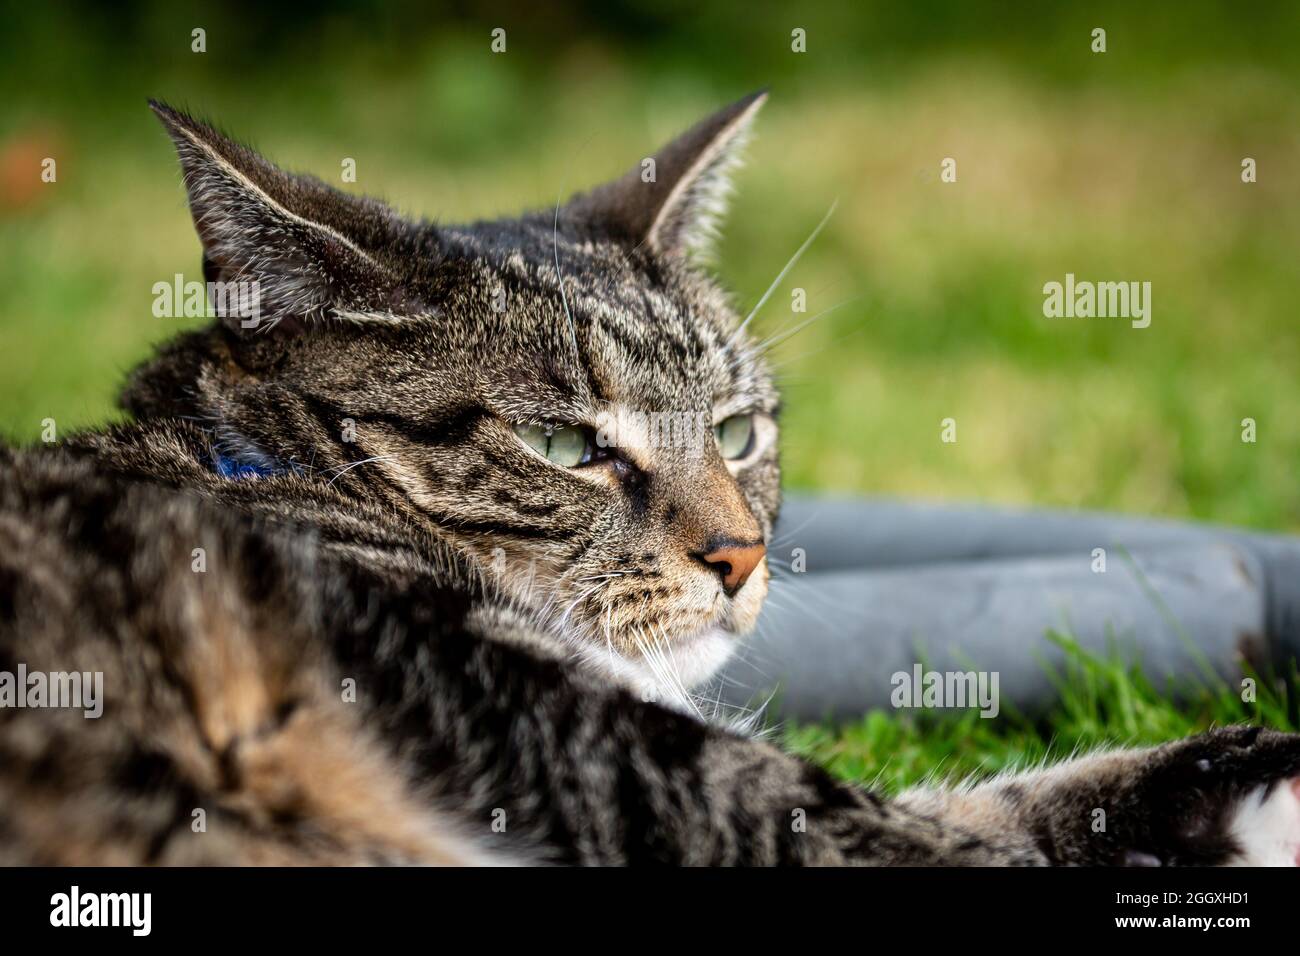 A close up of a tabby cat laying in a garden Stock Photo